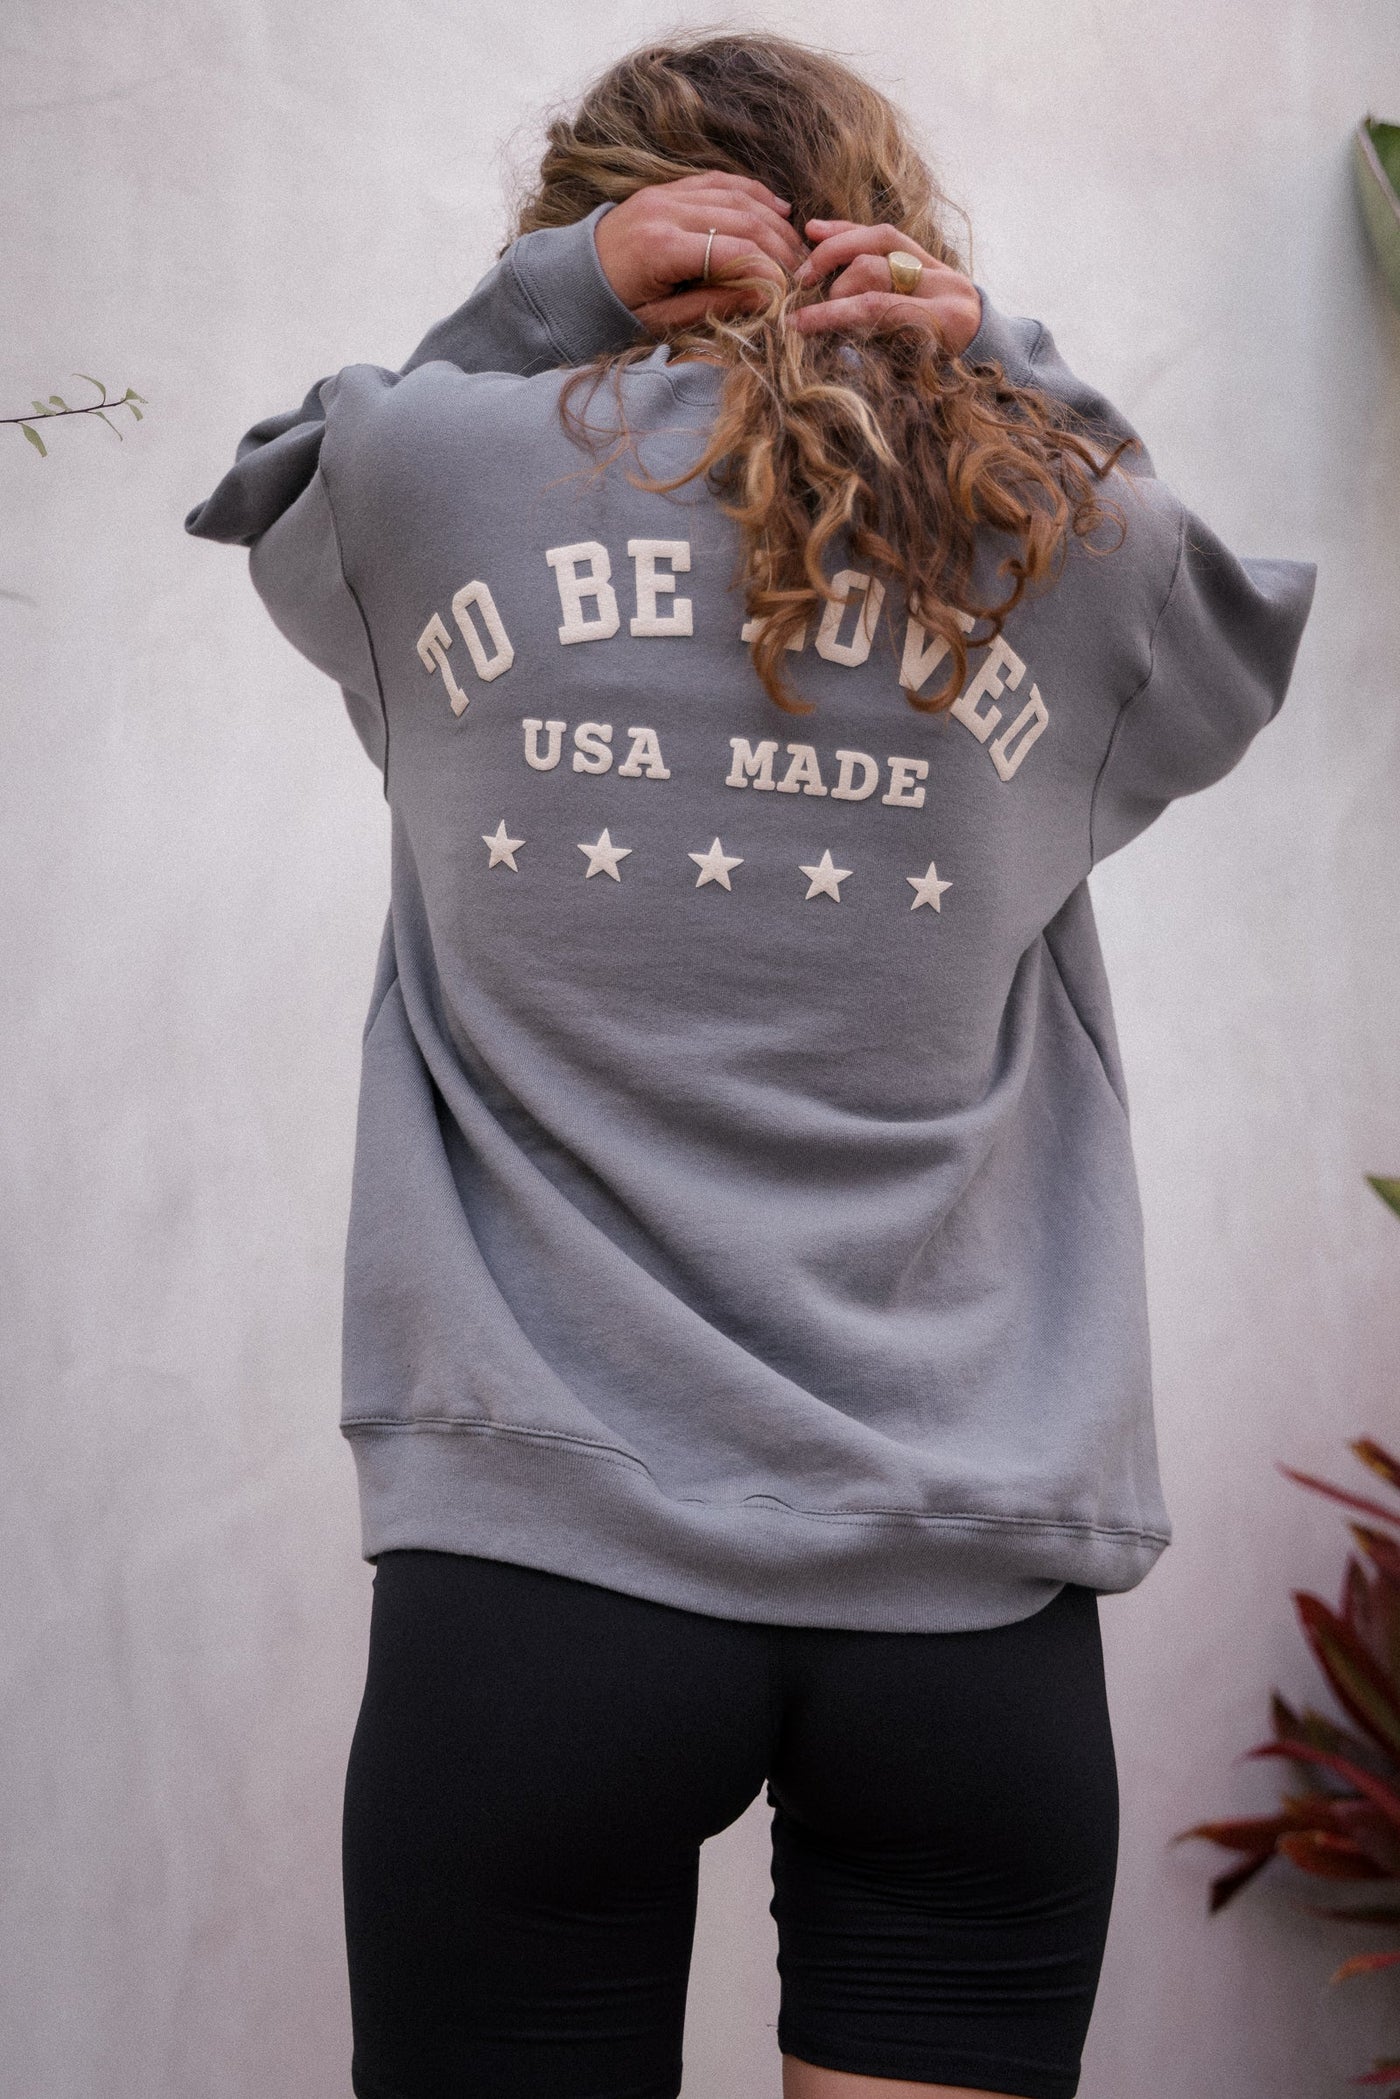 WithLove ♡ 'To Be Loved' Printed Pullover Sweatshirt